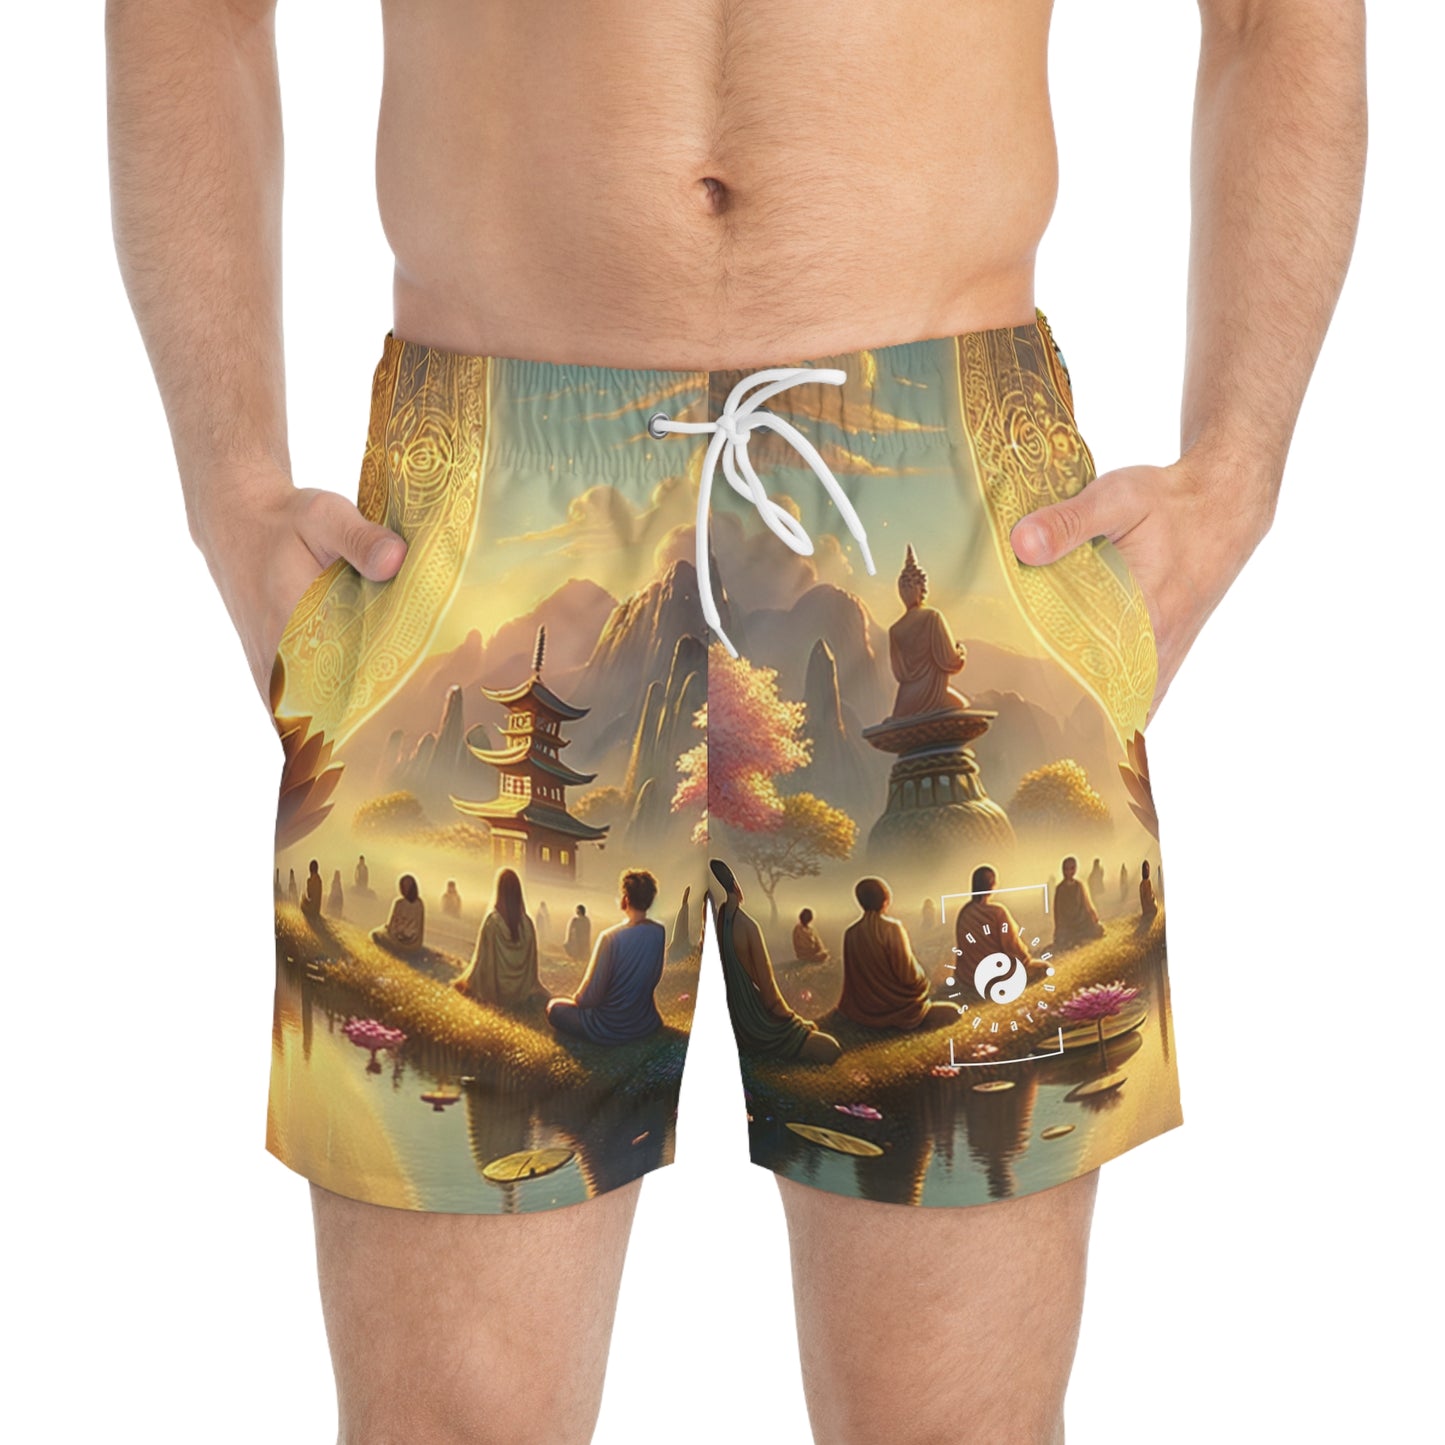 "Serenity in Transience: Illuminations of the Heart Sutra" - Swim Trunks for Men